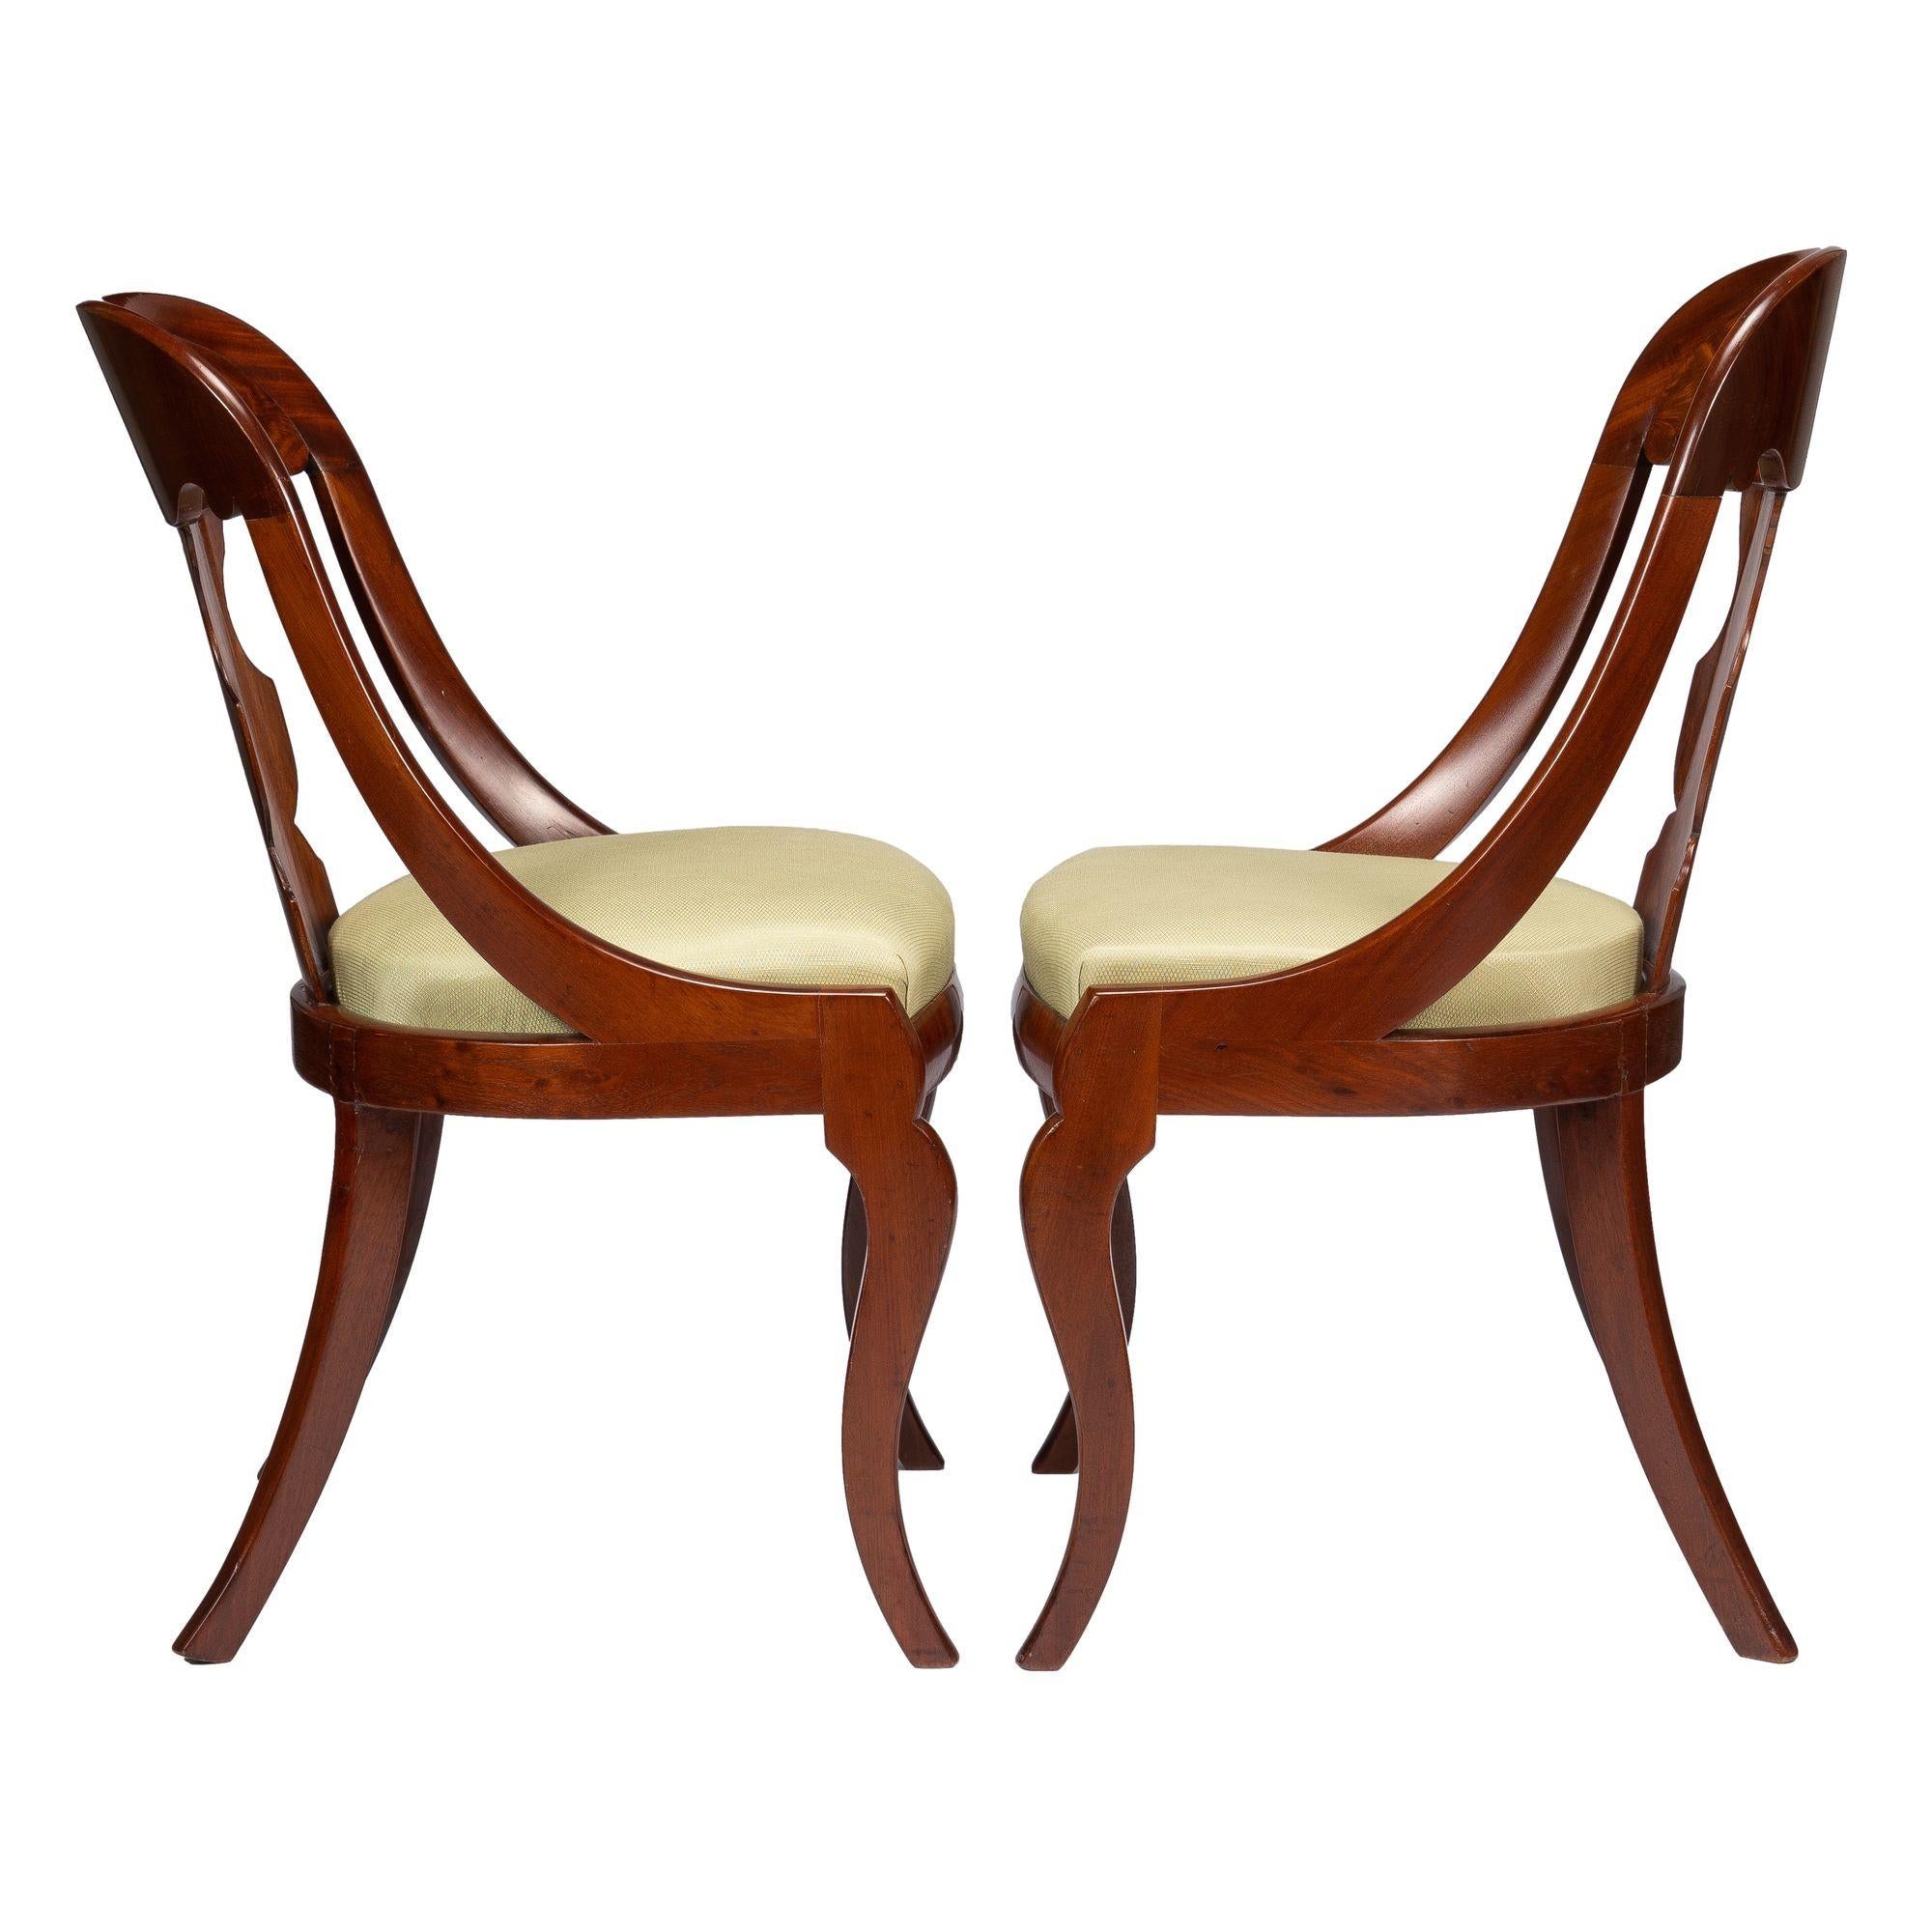 Pair of American Mahogany Gondola Chairs, 1815-35 For Sale 5